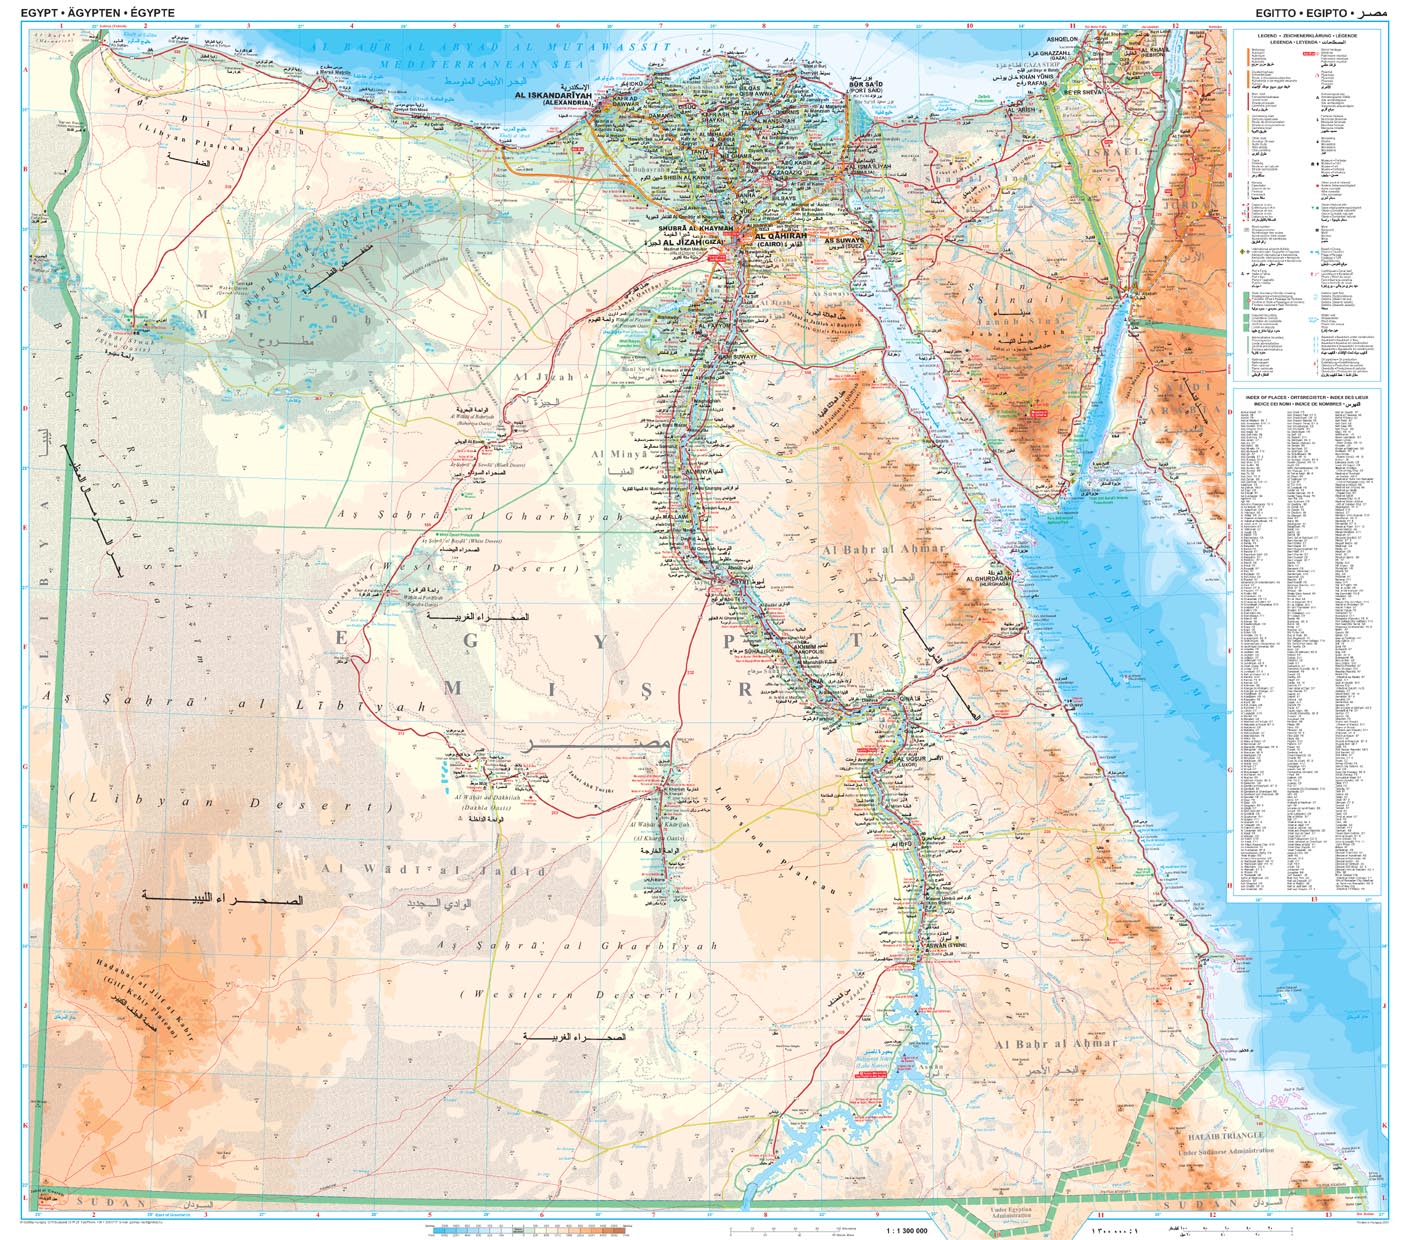 Ägypten 1:1,3 Mio. Geographical Map